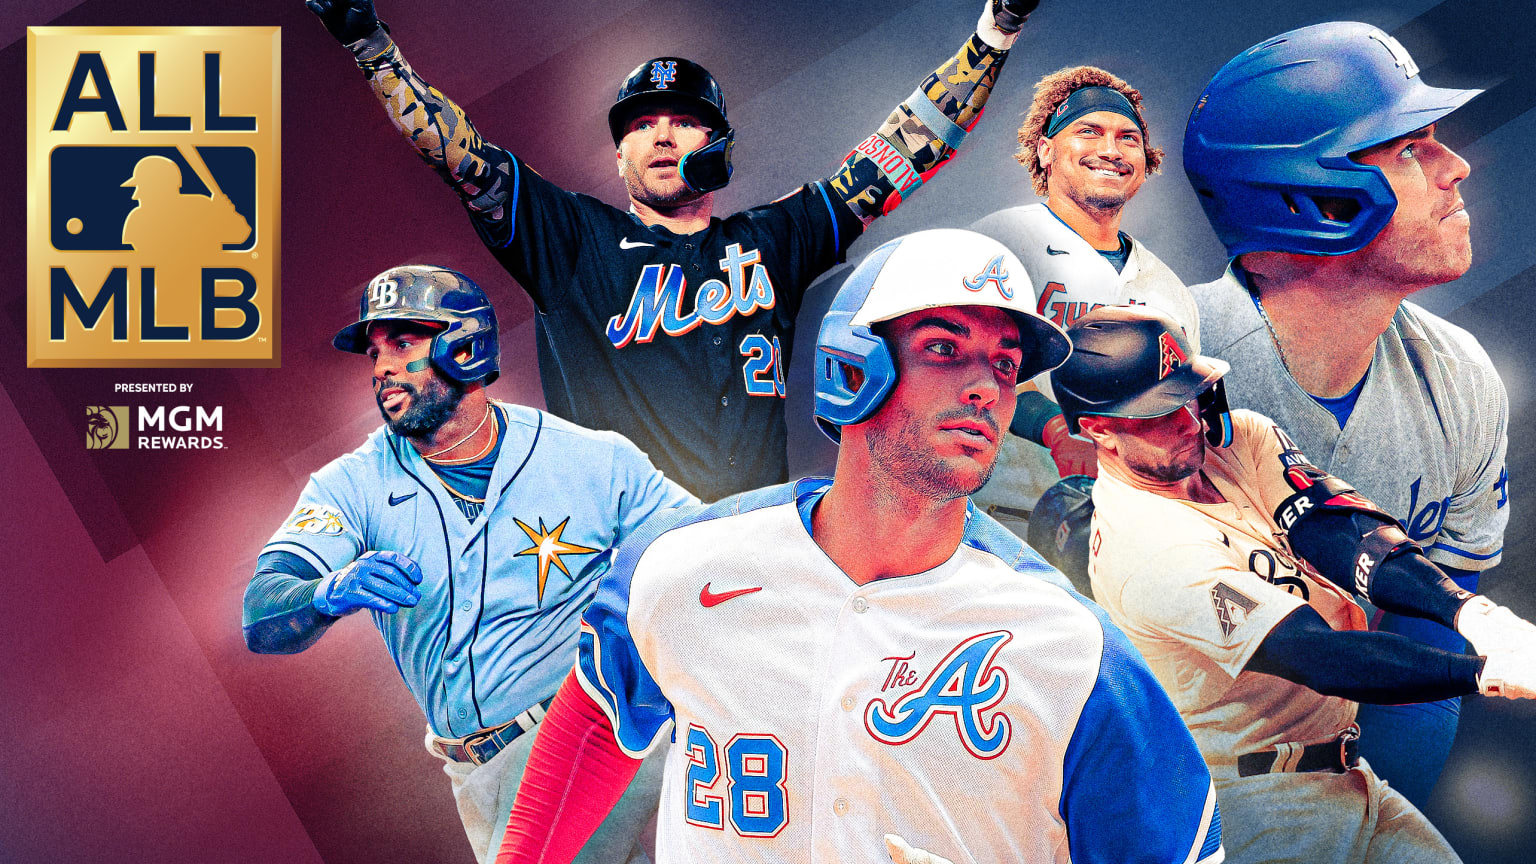 Pete Alonso, Josh Naylor, Freddie Freeman, Yandy Díaz, Matt Olson and Christian Walker are pictured next to the All-MLB logo